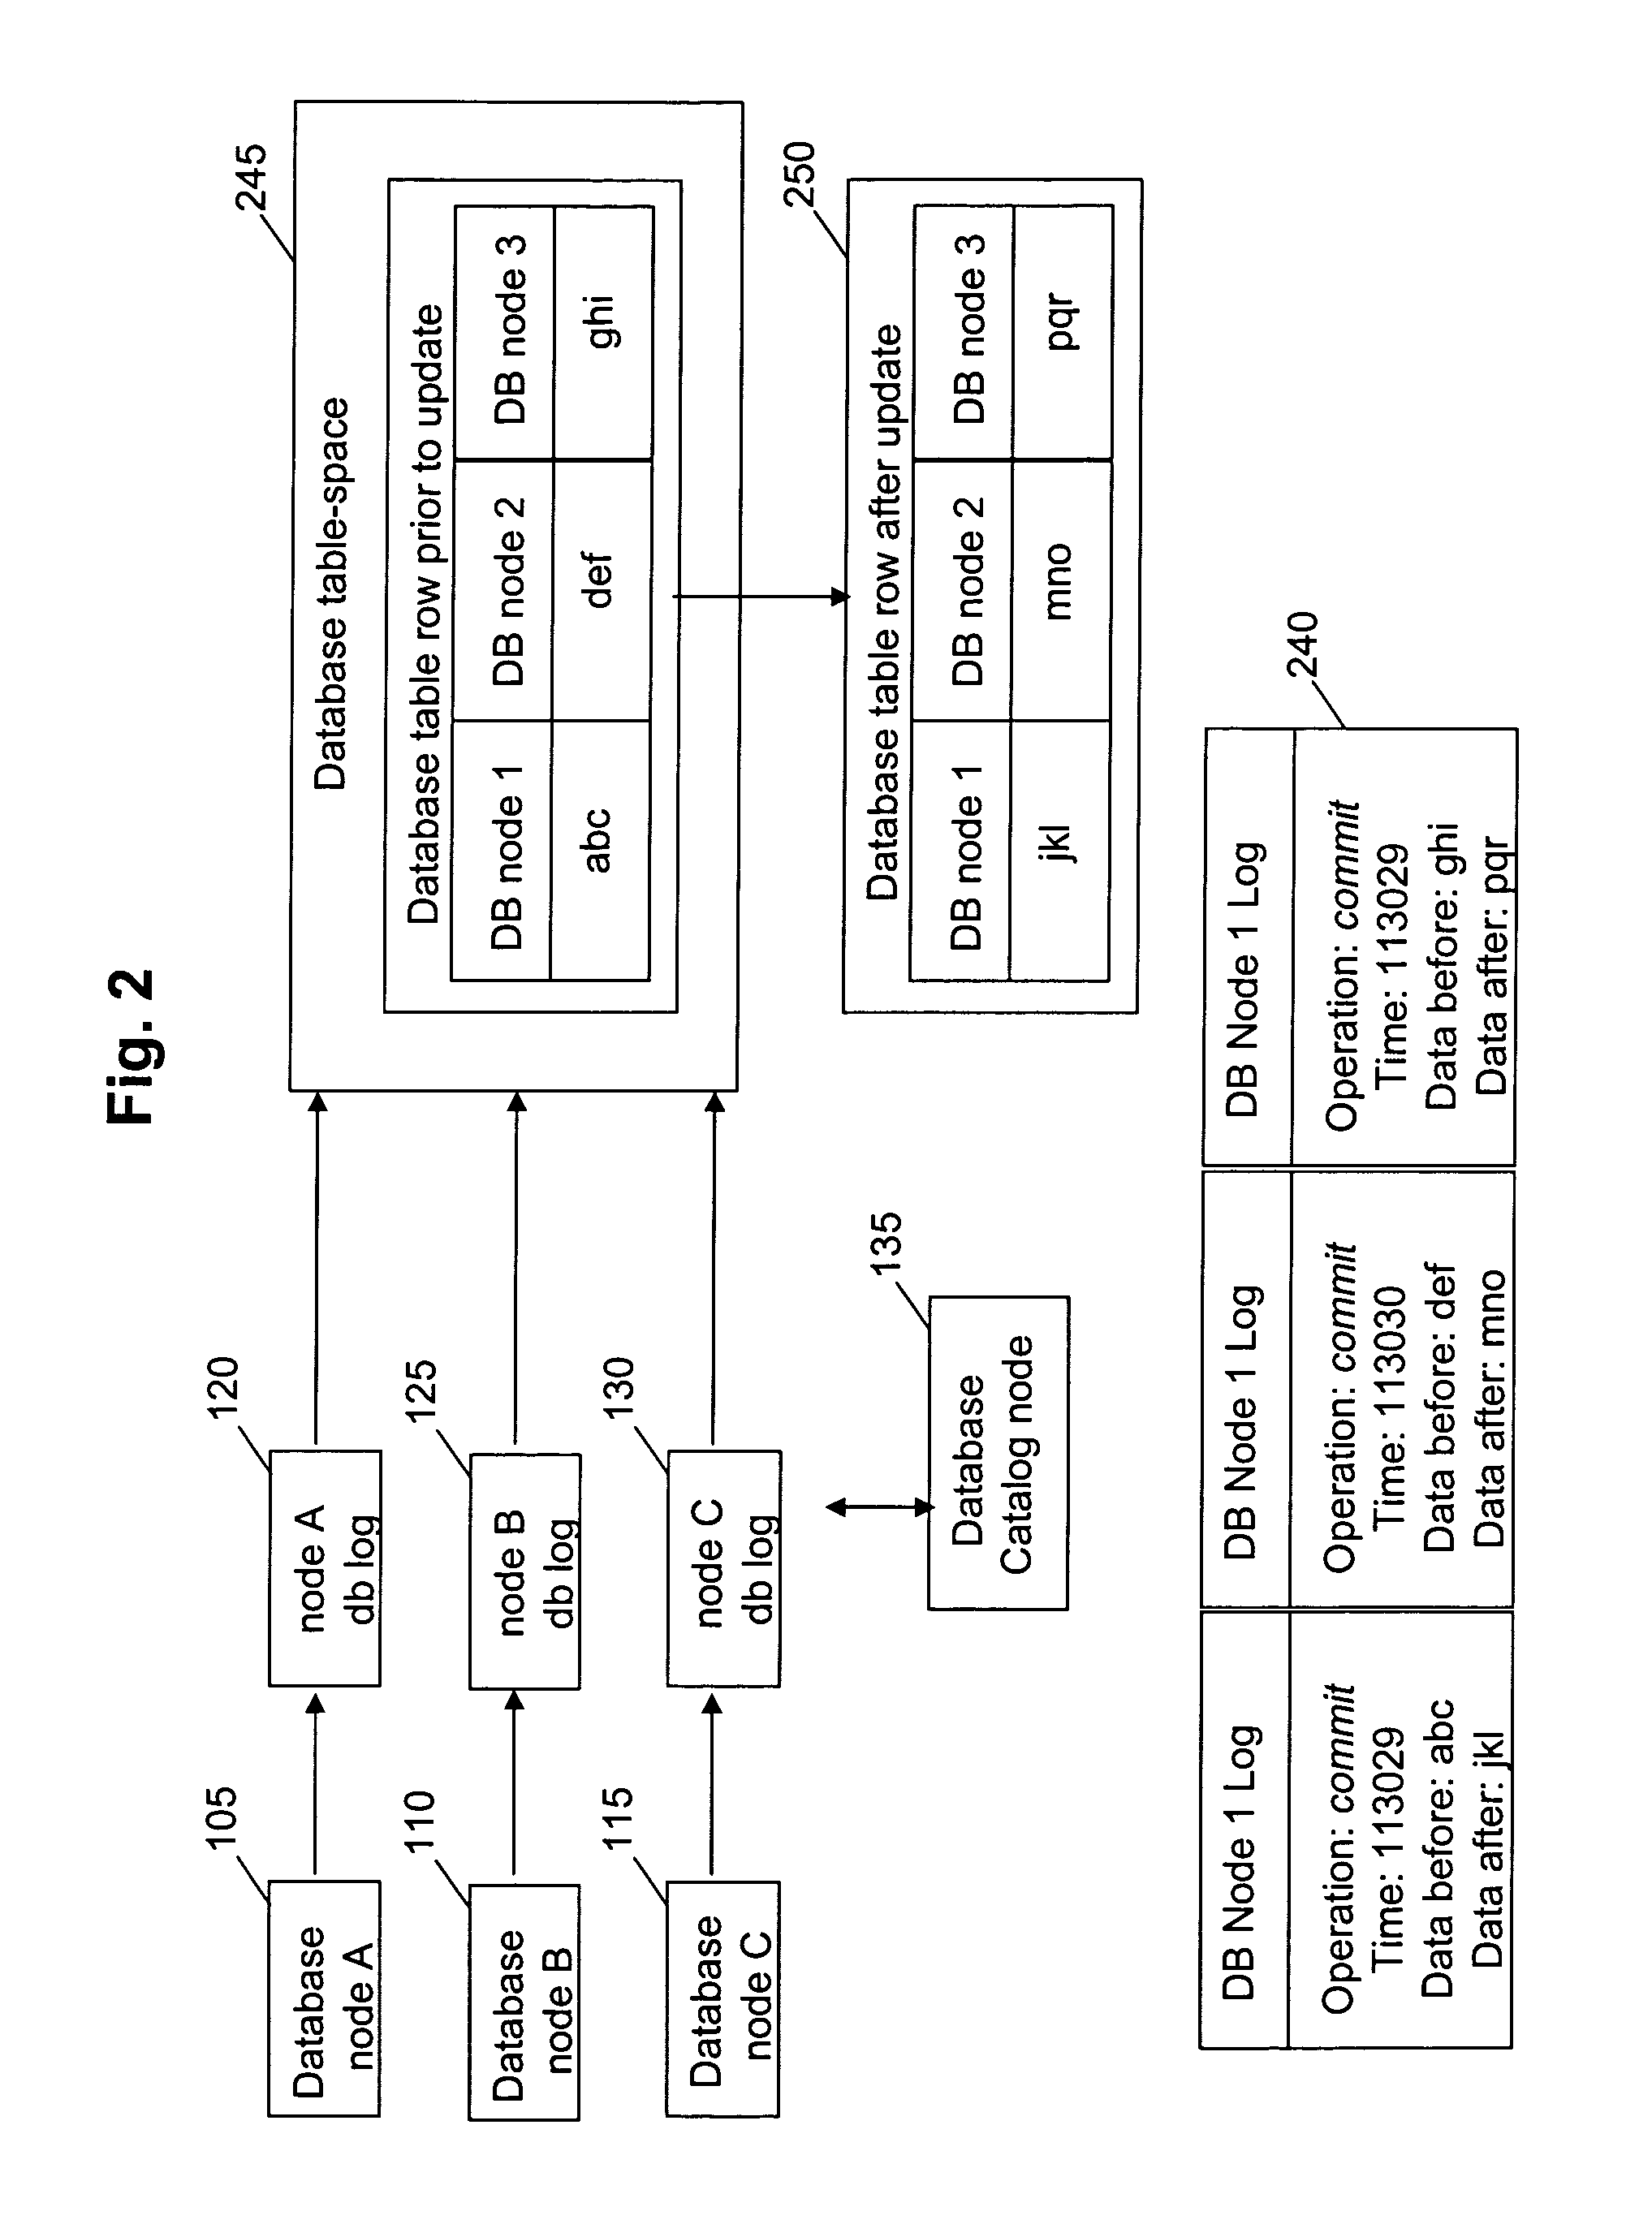 System and method for optimizing data recovery in a parallel database